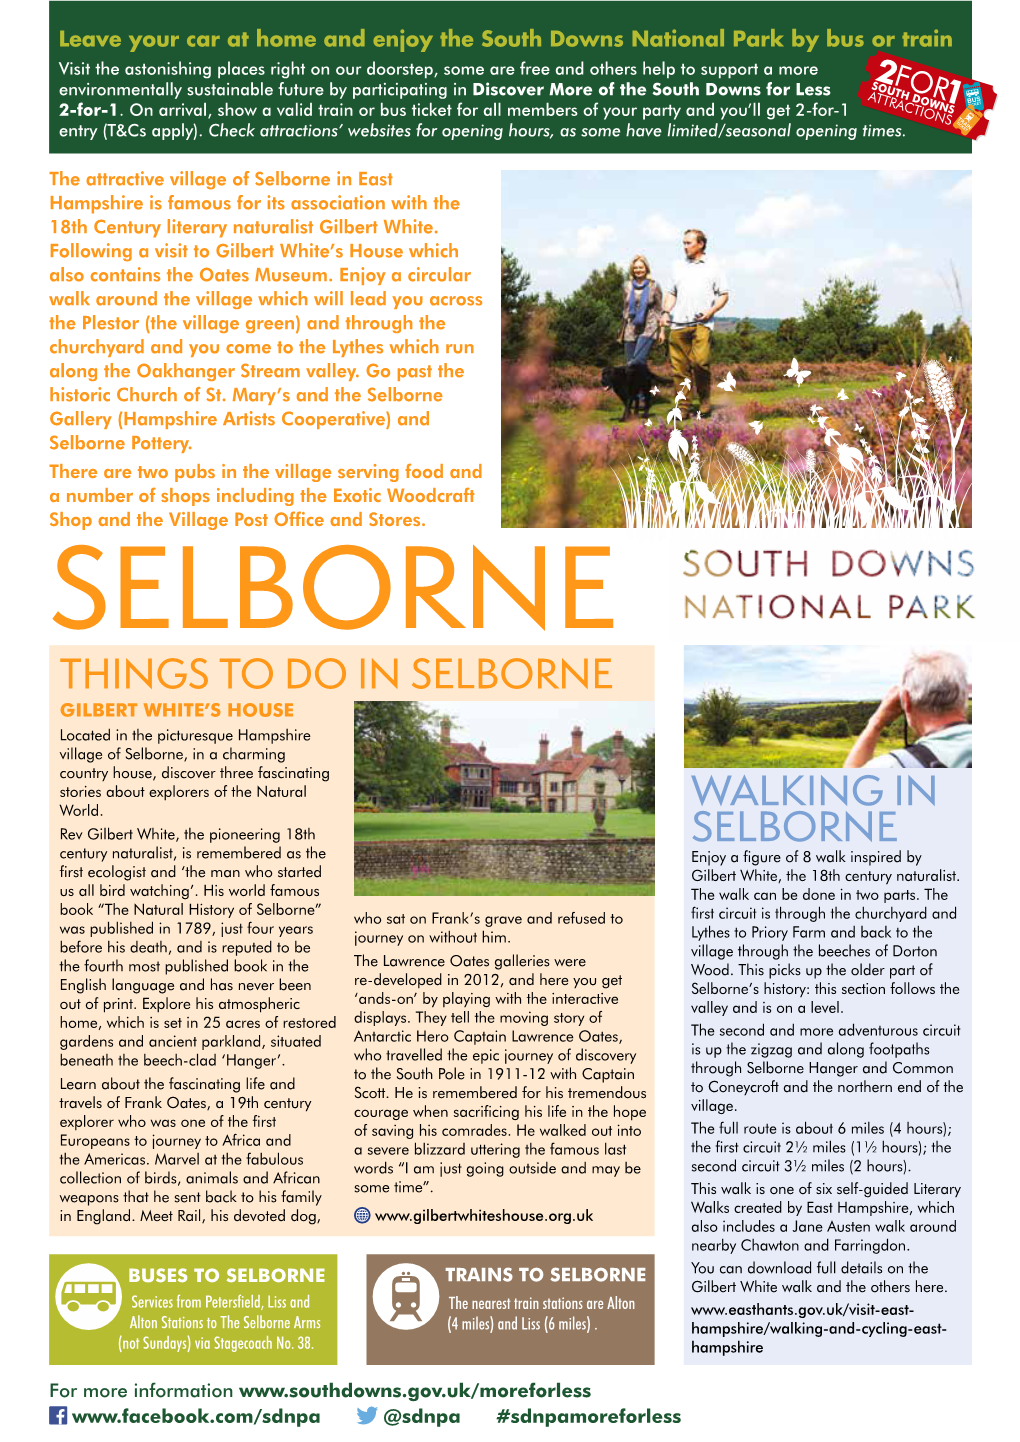 Selborne in East Hampshire Is Famous for Its Association with the 18Th Century Literary Naturalist Gilbert White